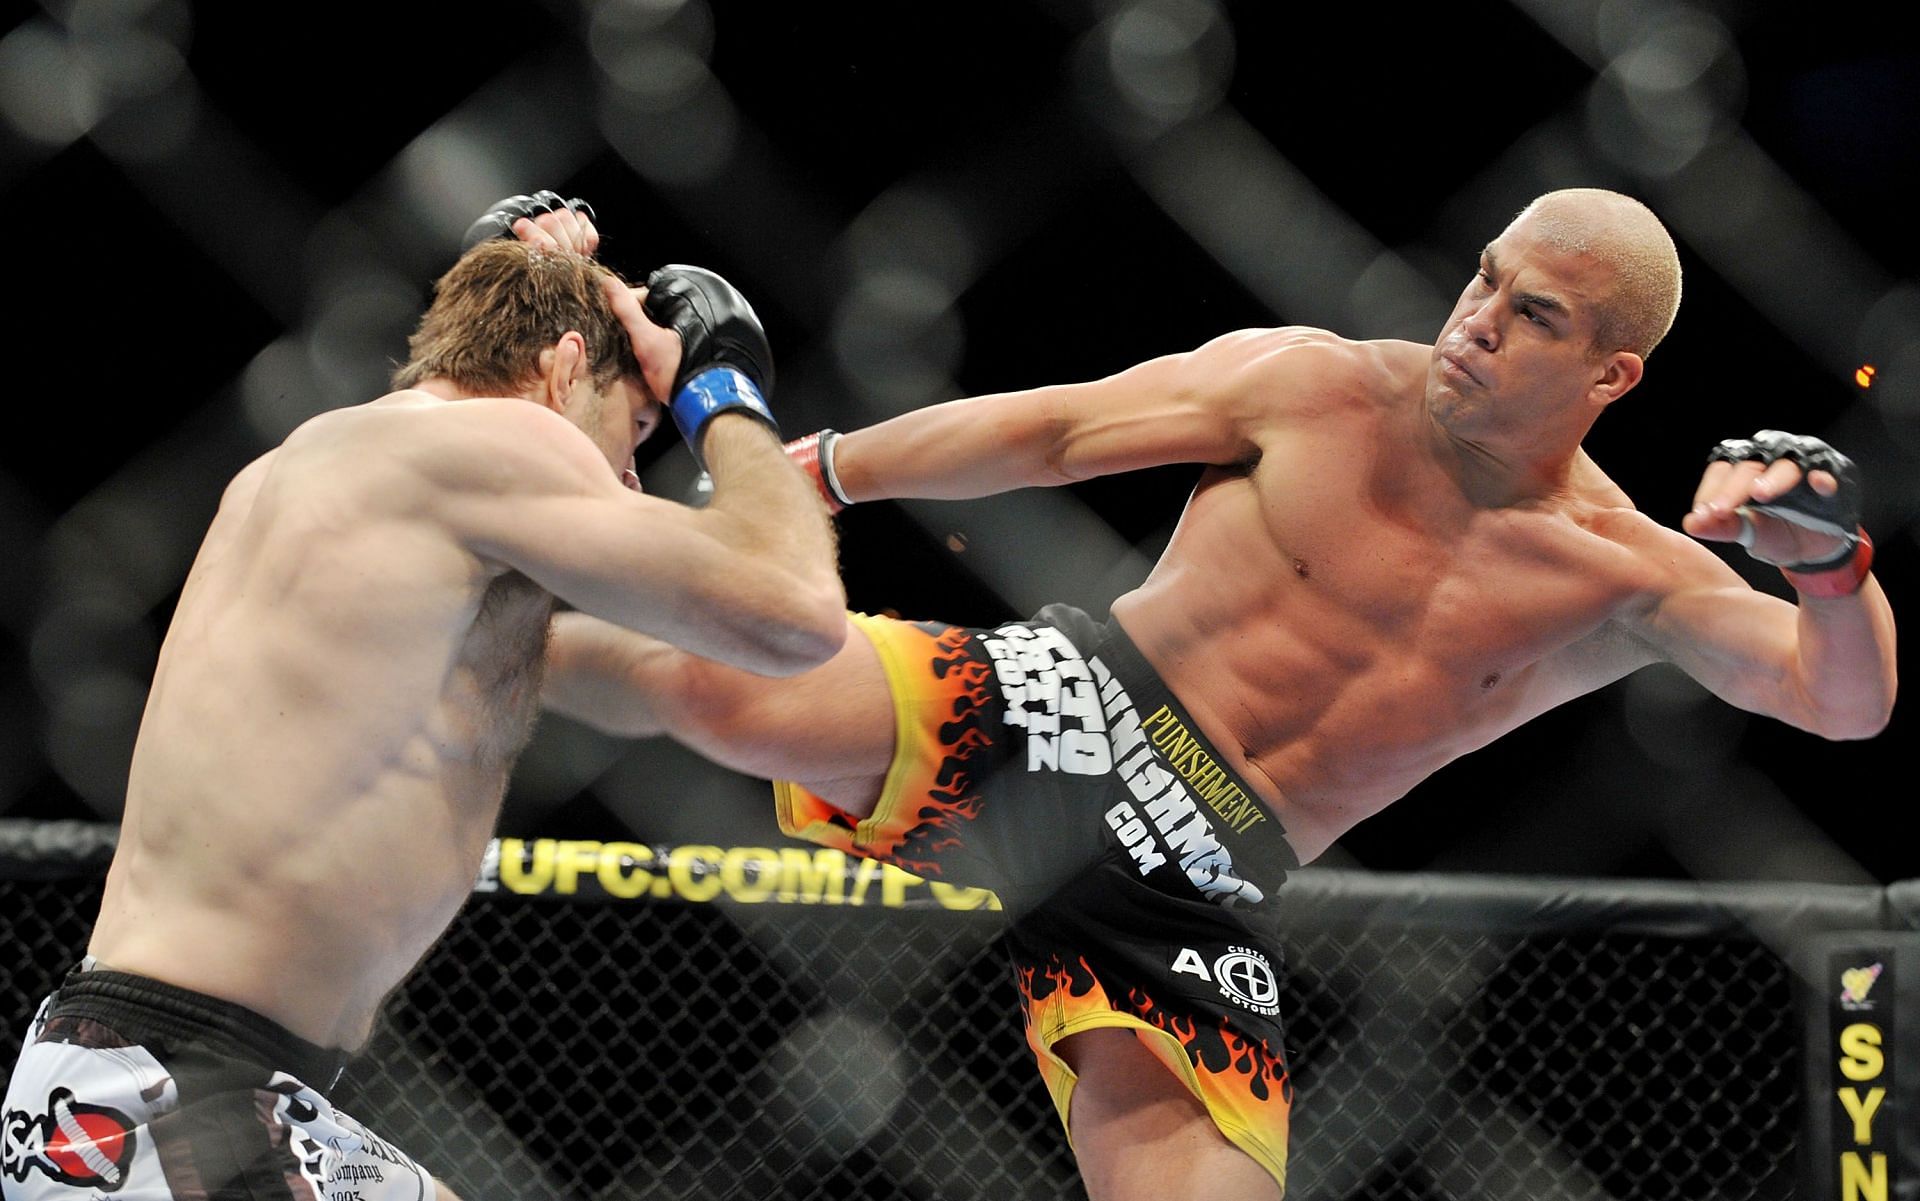 Tito Ortiz used a fence grab to gain an advantage in his bout with Rashad Evans in 2007